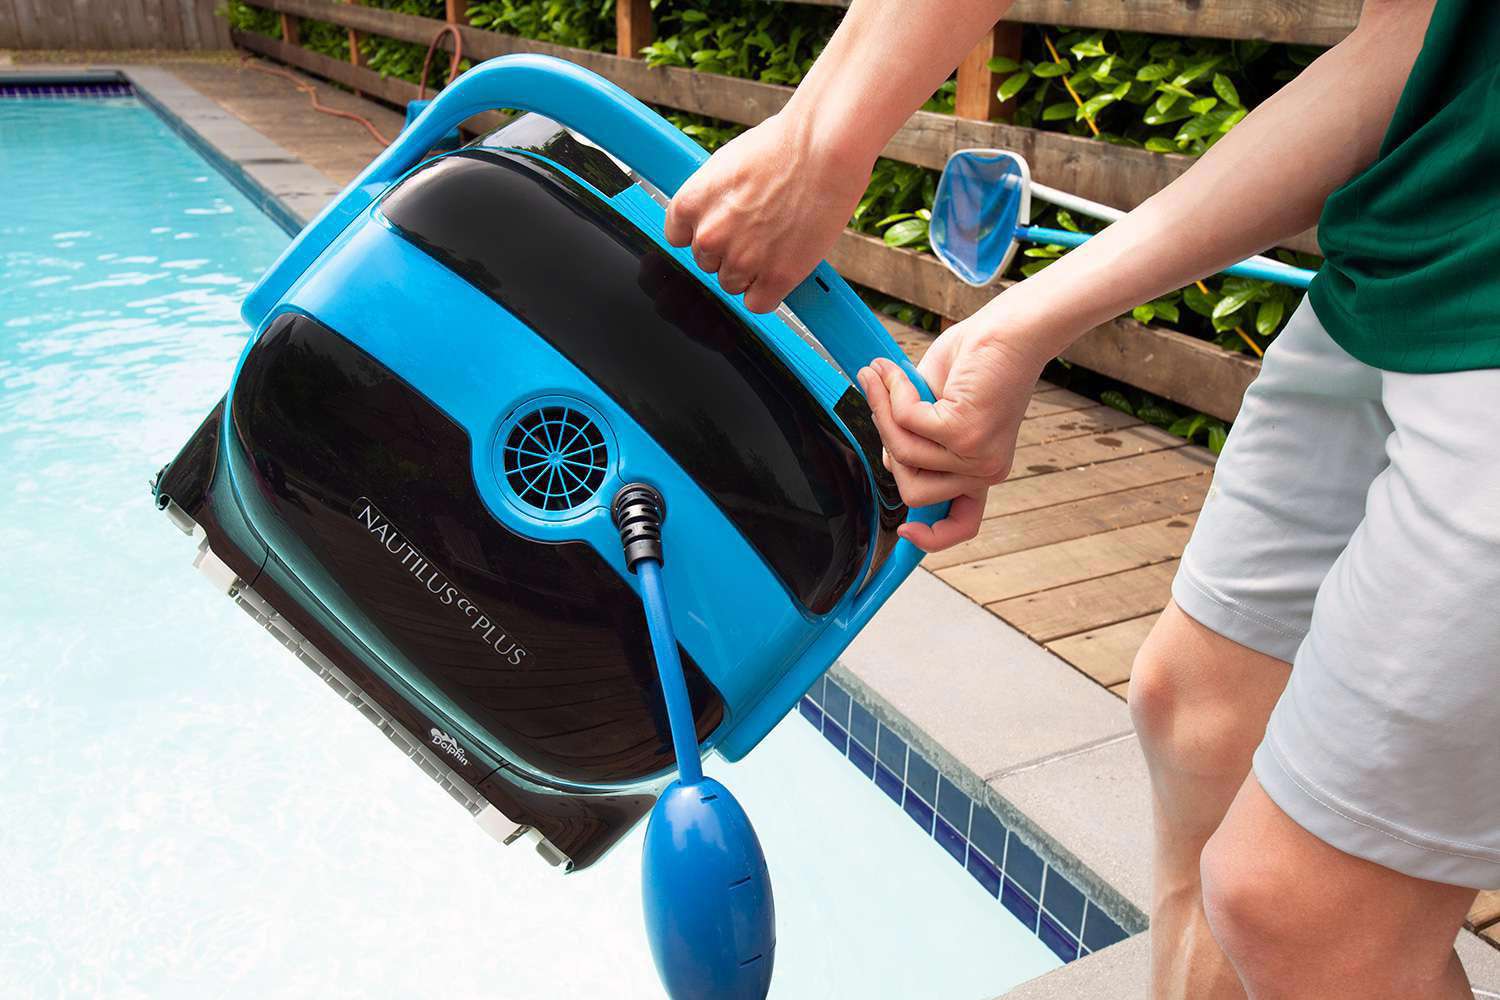 What Is The Best Robot Vacuum For Pool